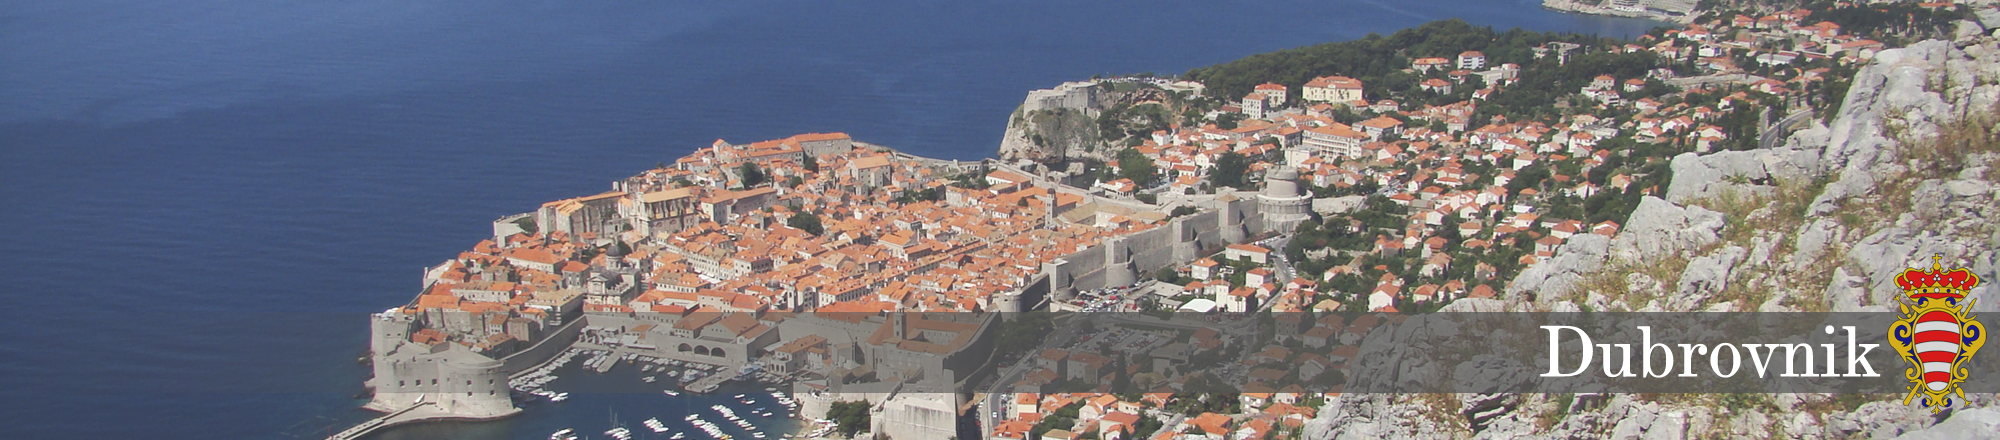 City of Dubrovnik, Department for the spatial planning, urbanism and environment